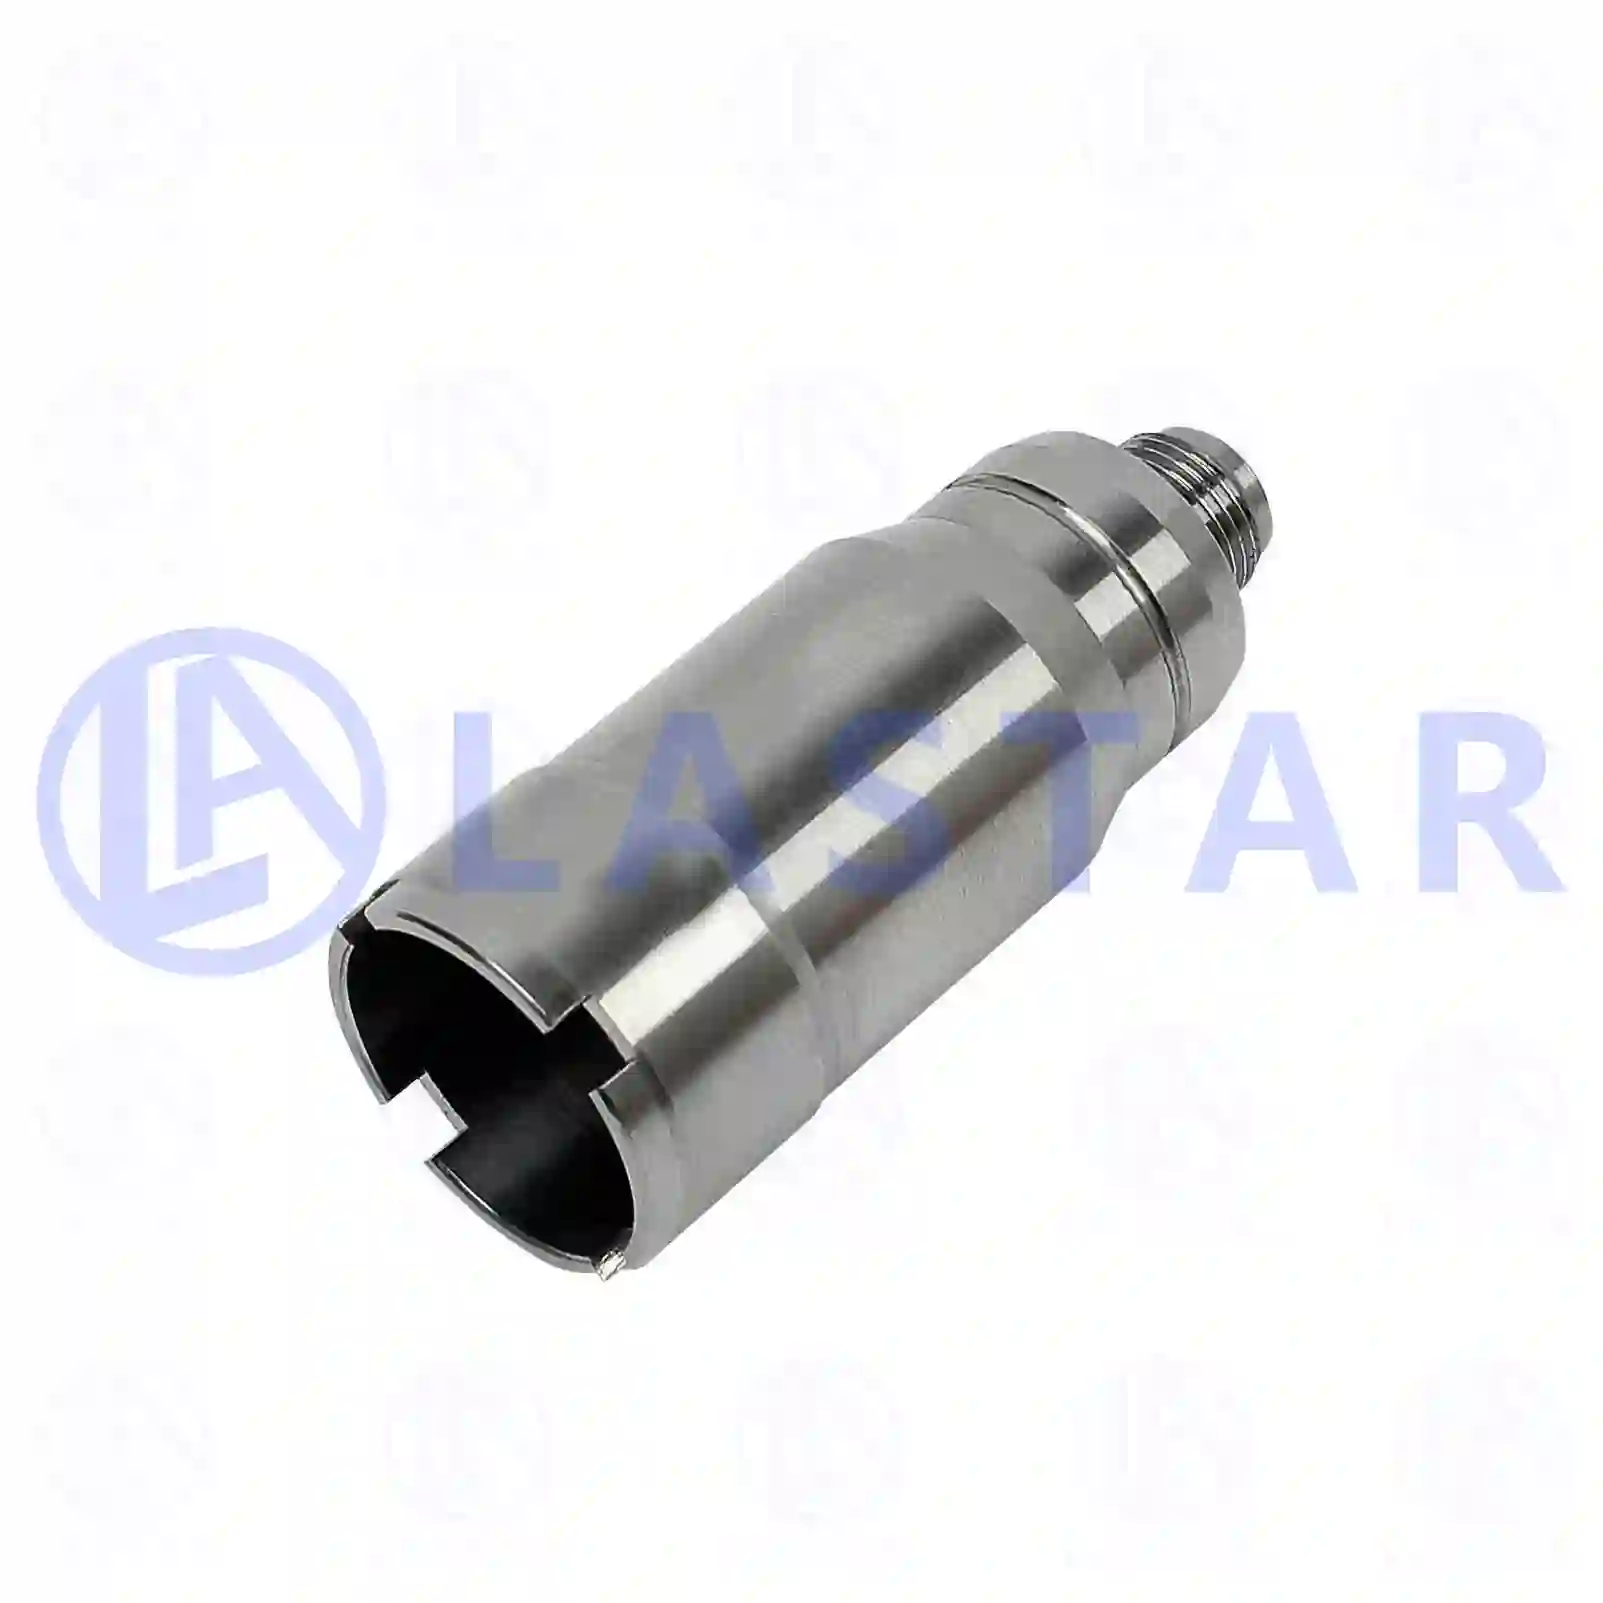 Injection sleeve, 77701627, 5410170188, , ||  77701627 Lastar Spare Part | Truck Spare Parts, Auotomotive Spare Parts Injection sleeve, 77701627, 5410170188, , ||  77701627 Lastar Spare Part | Truck Spare Parts, Auotomotive Spare Parts